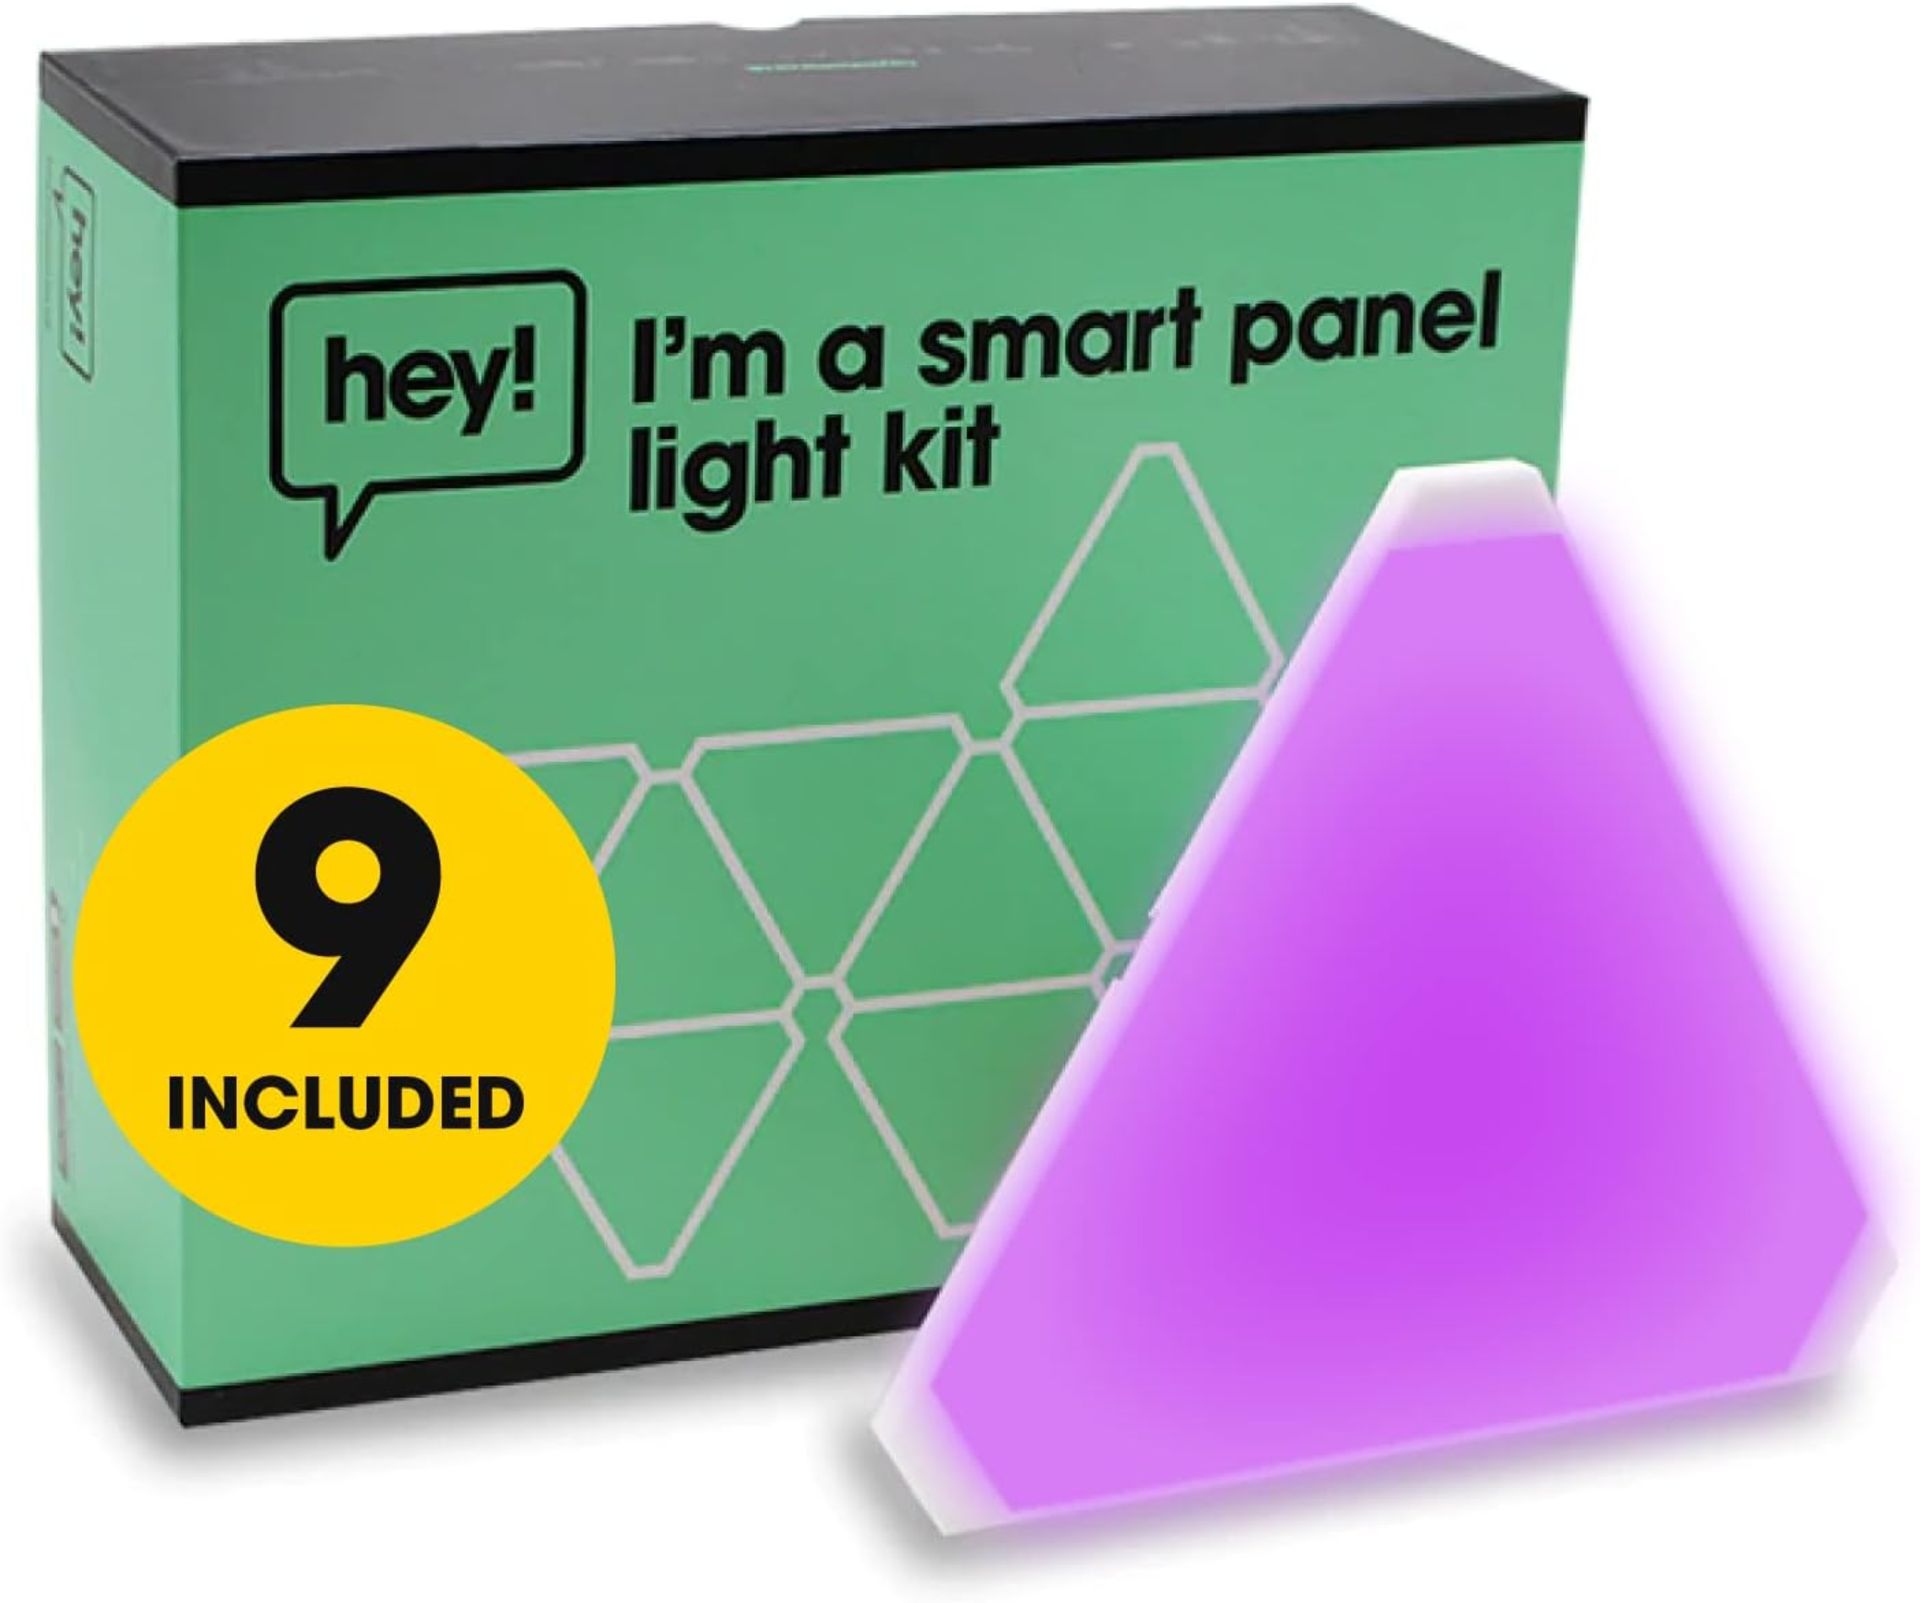 TRADE LOT TO CONTAIN 10x NEW & BOXED HEY! SMART LED RGBW Panel Lighting Kit. RRP £119.99 EACH.